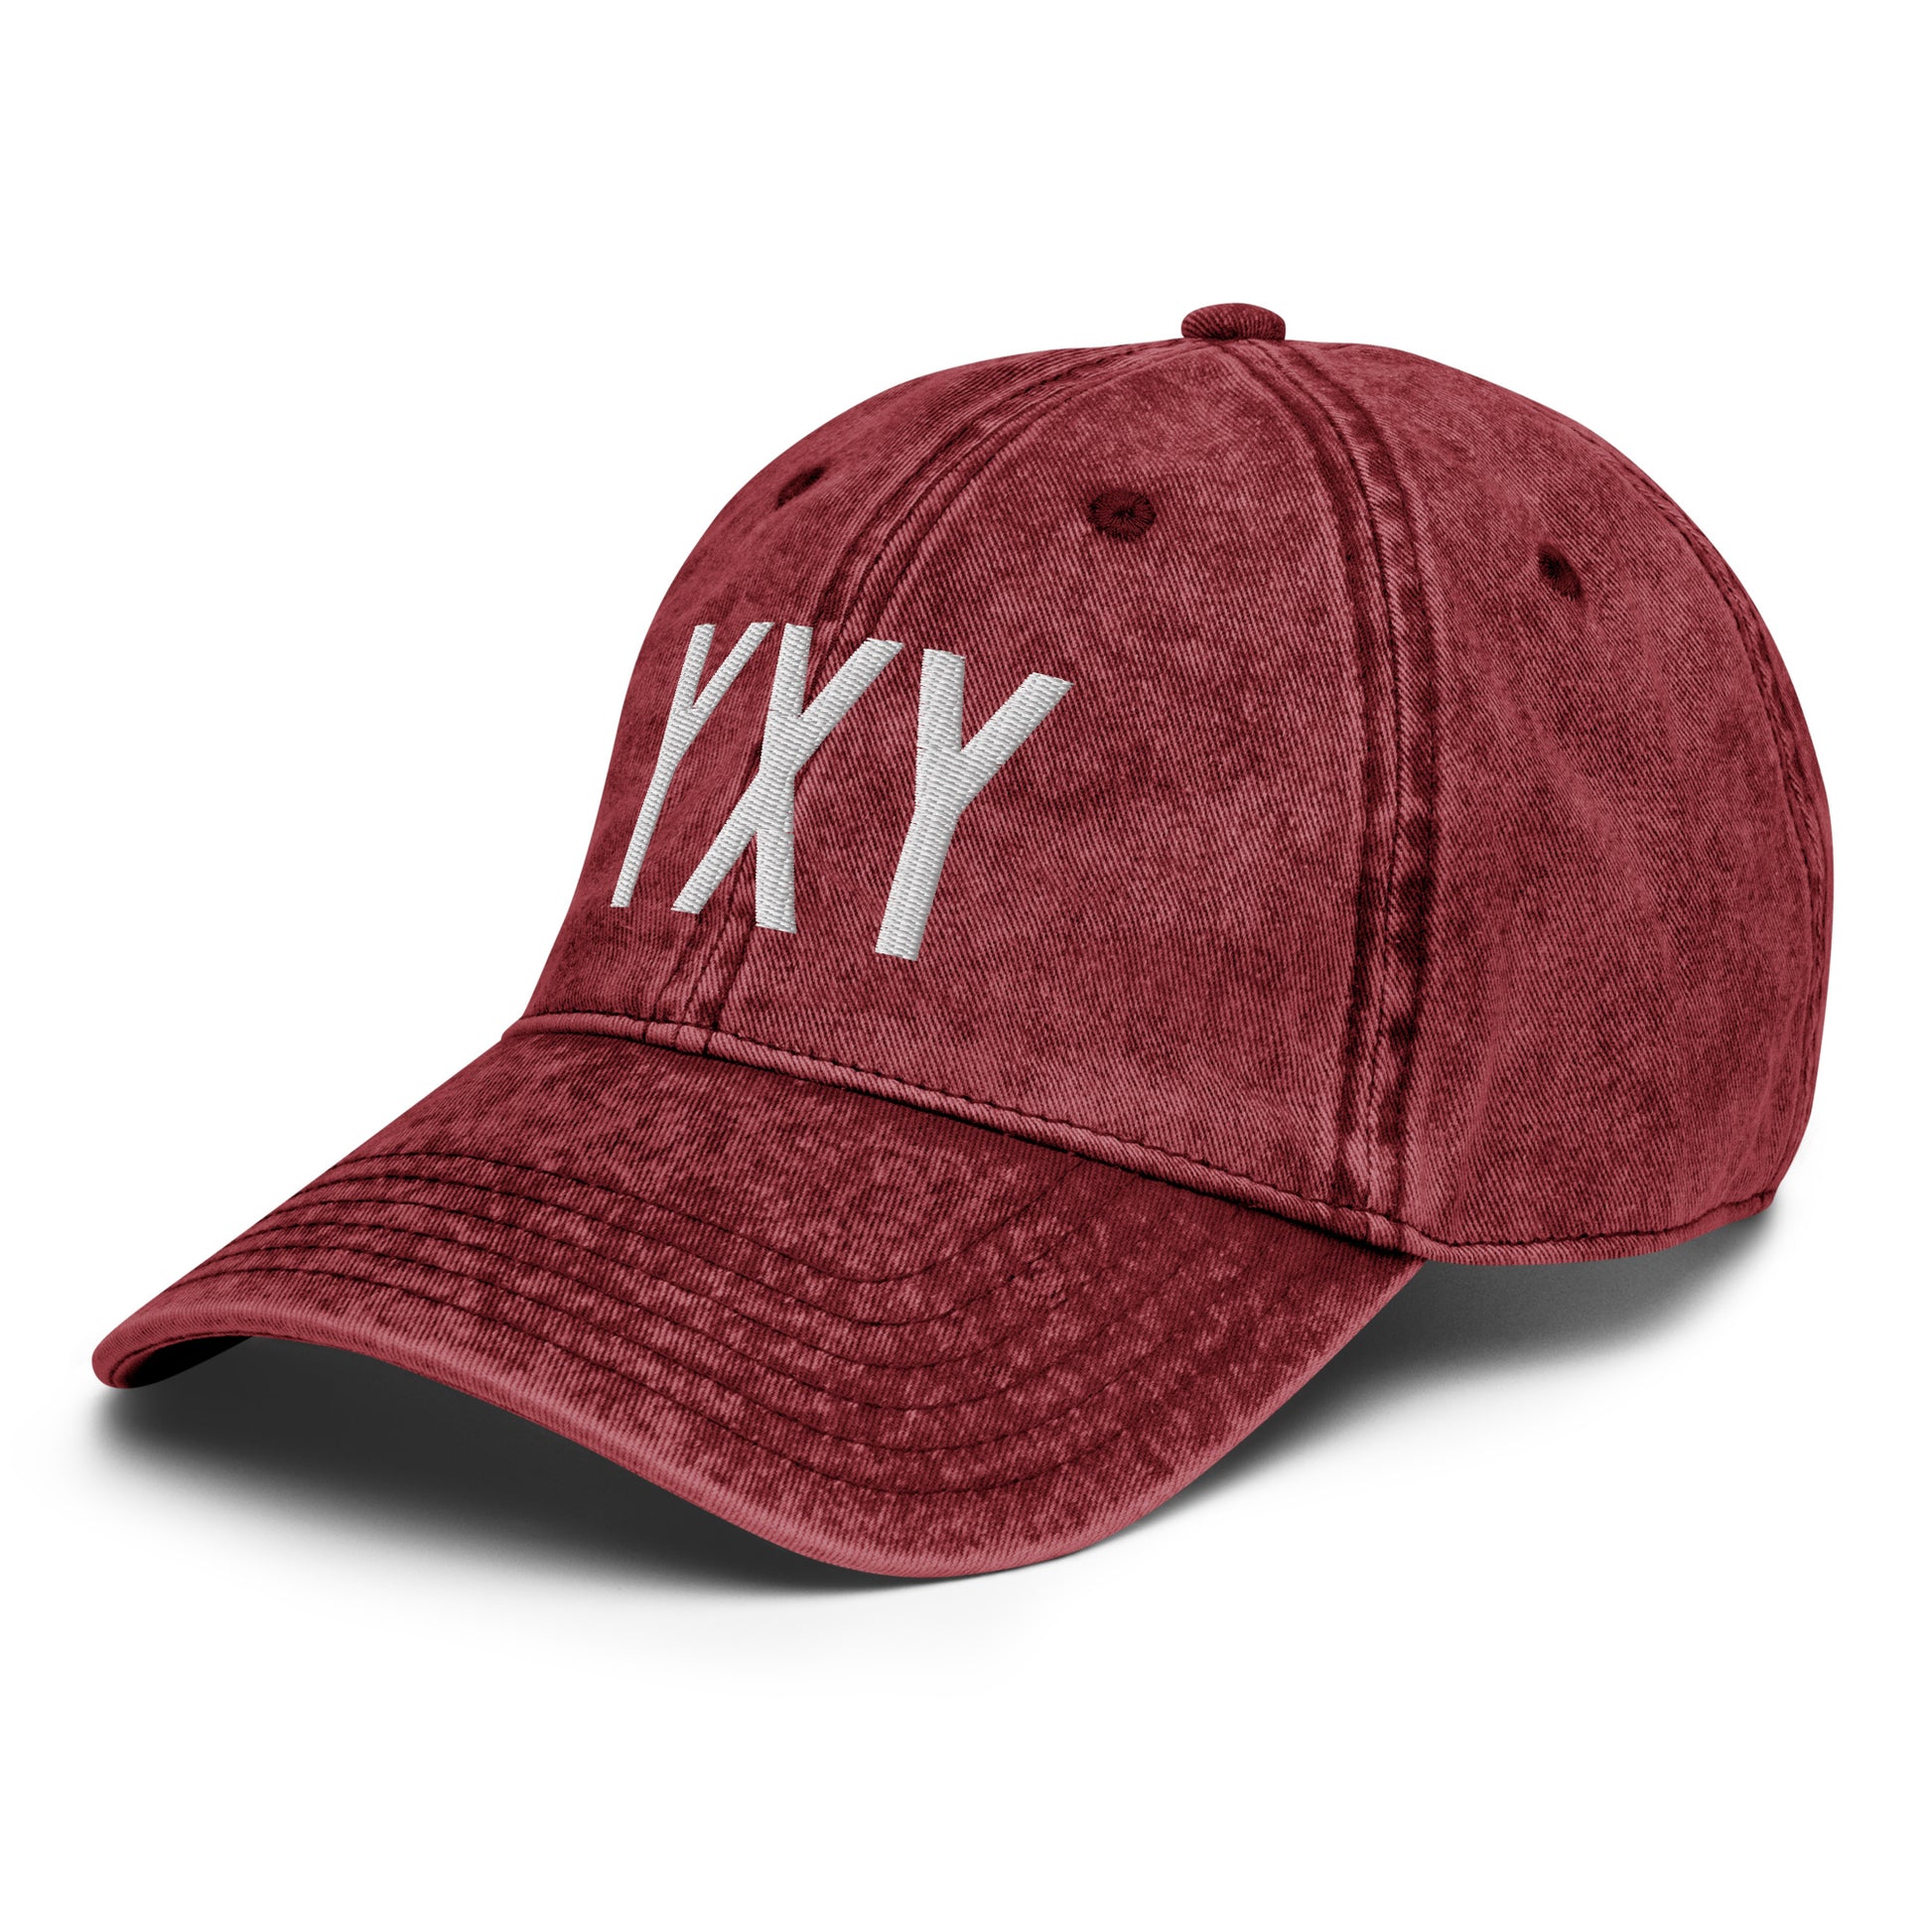 Airport Code Twill Cap - White • YXY Whitehorse • YHM Designs - Image 20